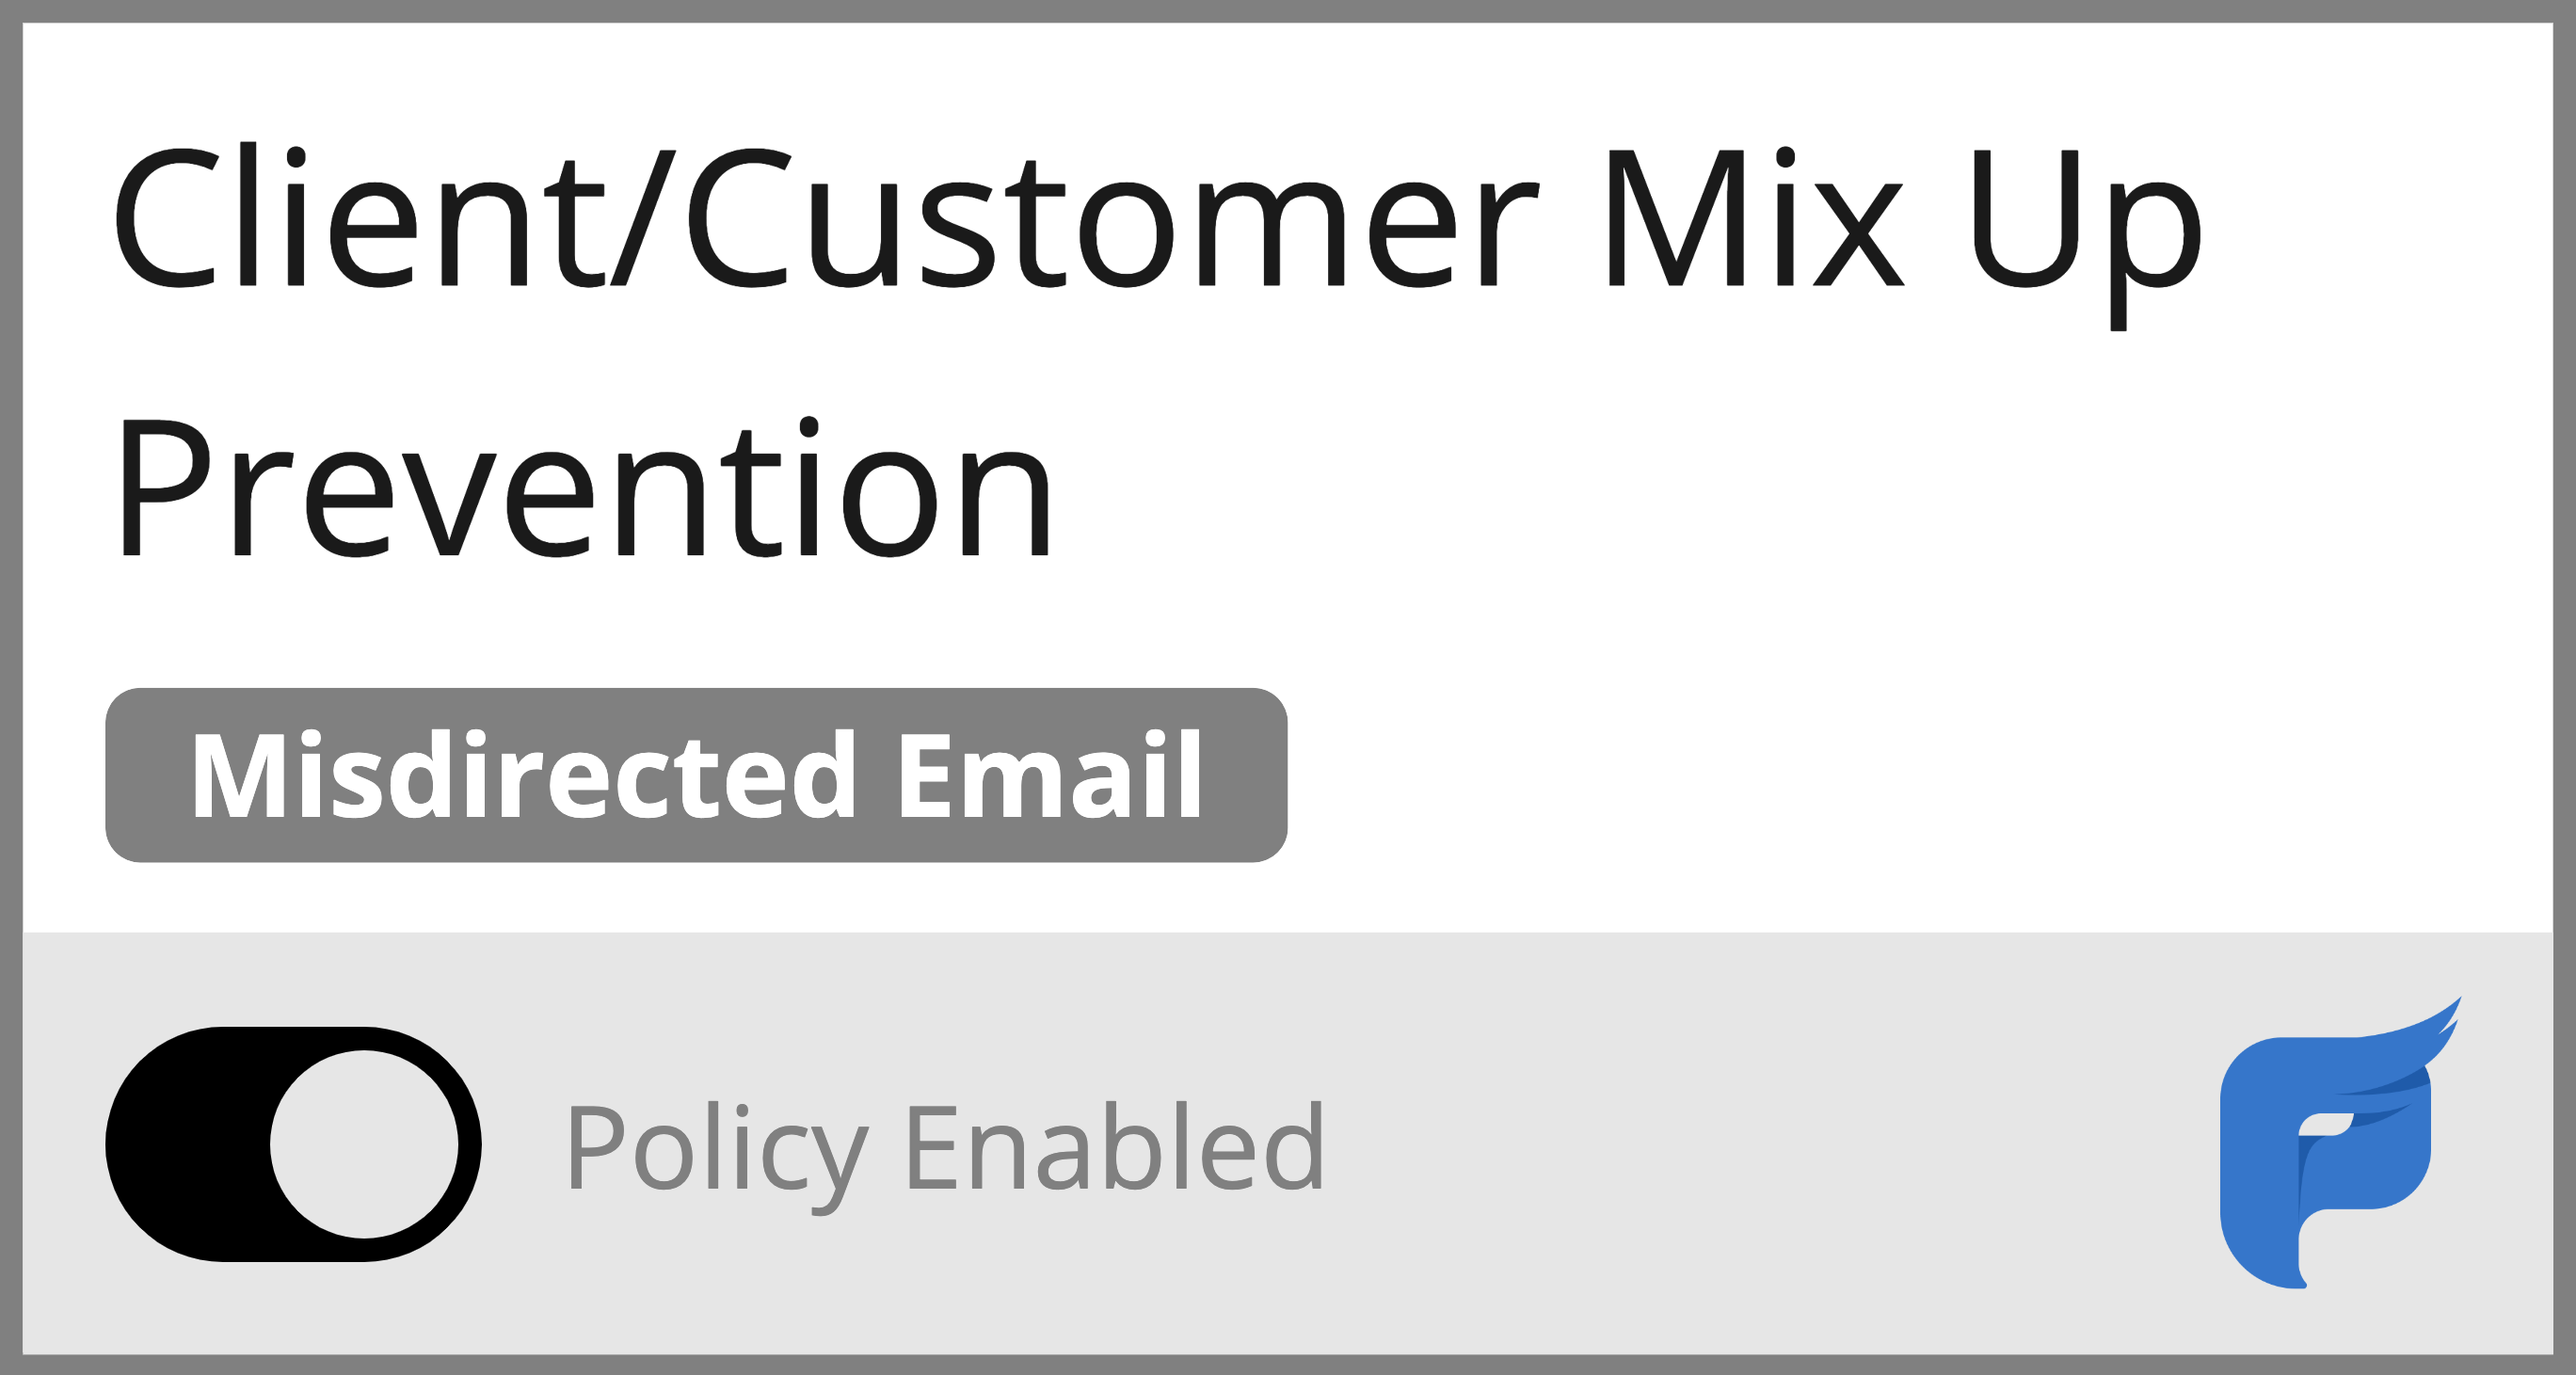 preava-prevent-misdirected-email-policy-client-customer-mix-up-prevention